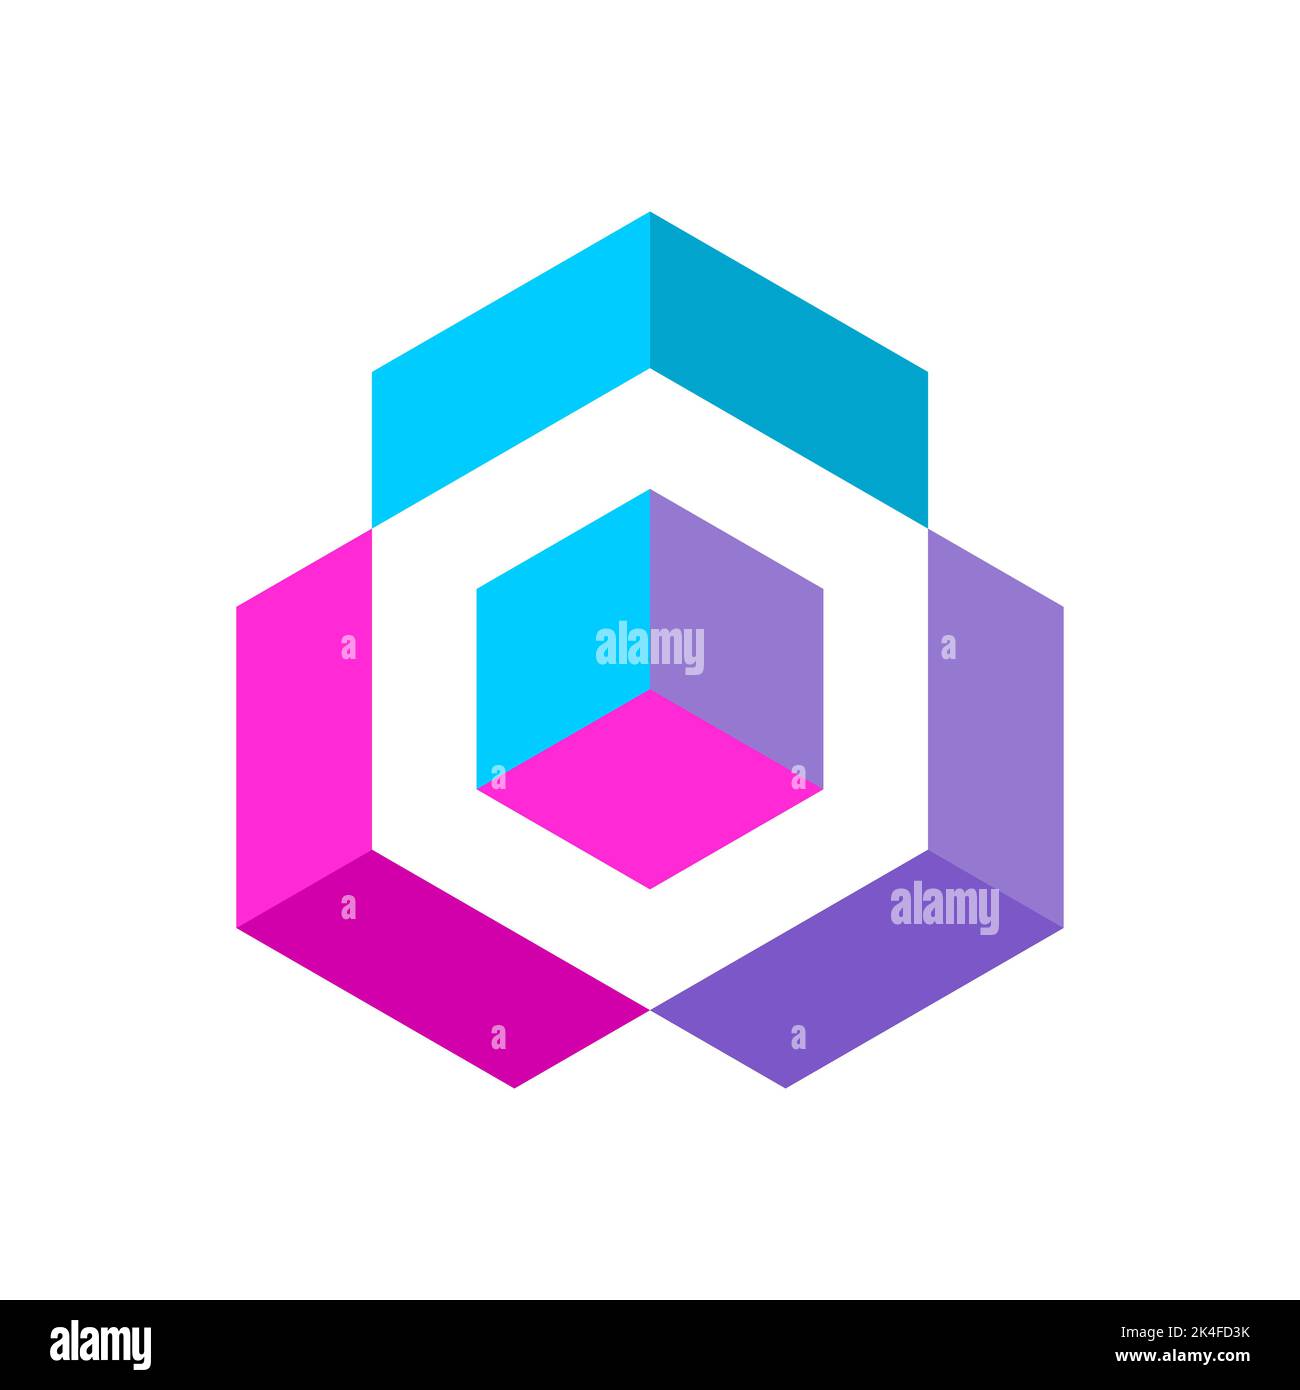 Colorful cube logo template. Isometric block shapes. Hexagonal design element. Blue, purple, pink. Geometric box with three parts. Puzzle game pieces. Stock Vector